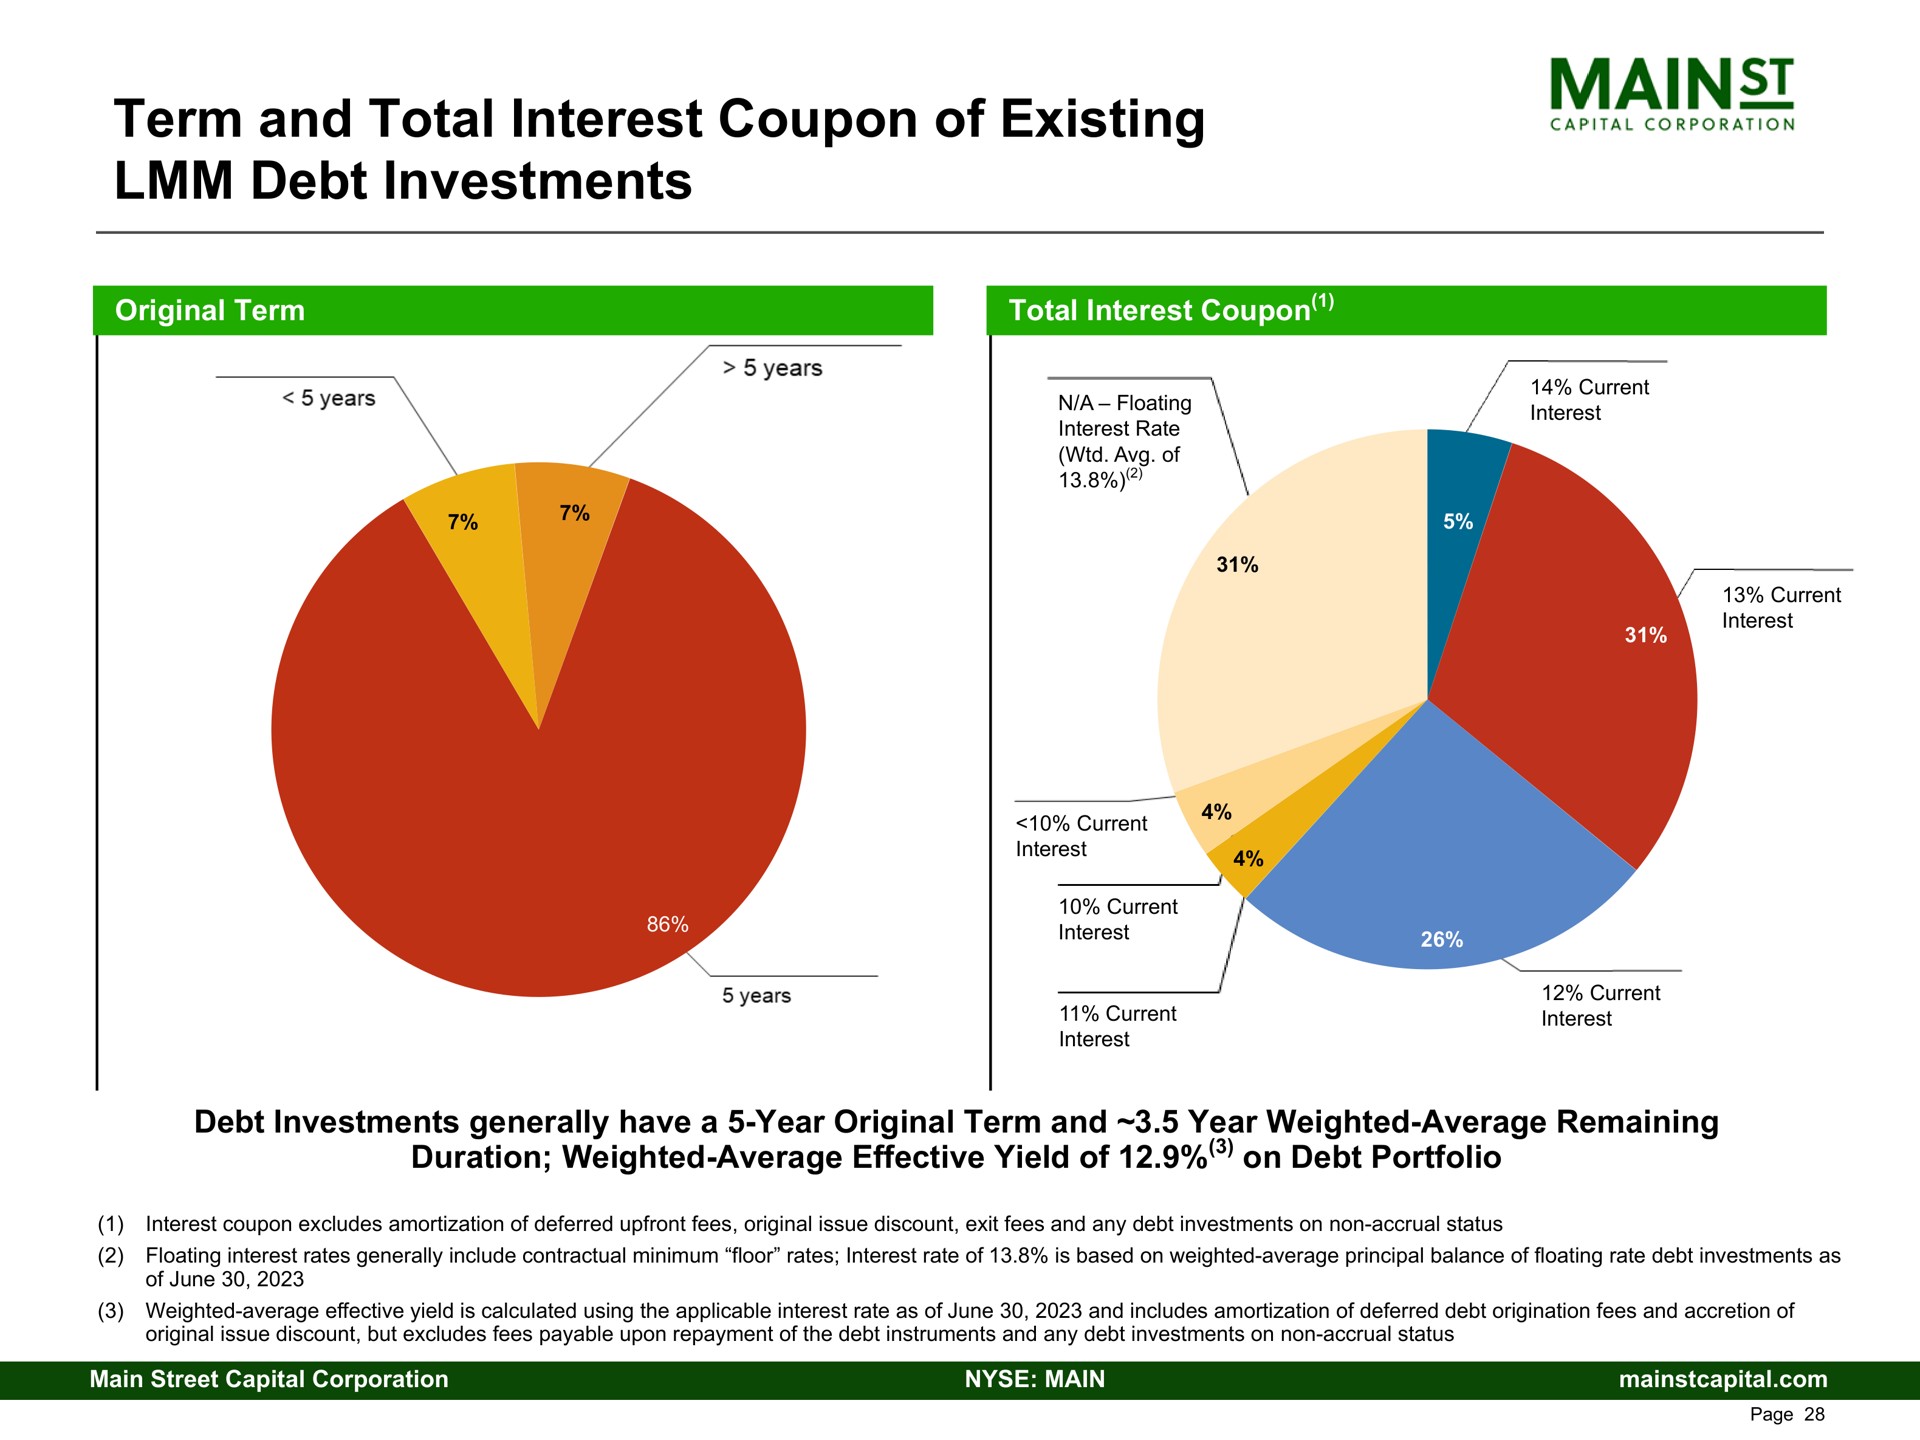 term and total interest coupon of existing debt investments capital corporation | Main Street Capital